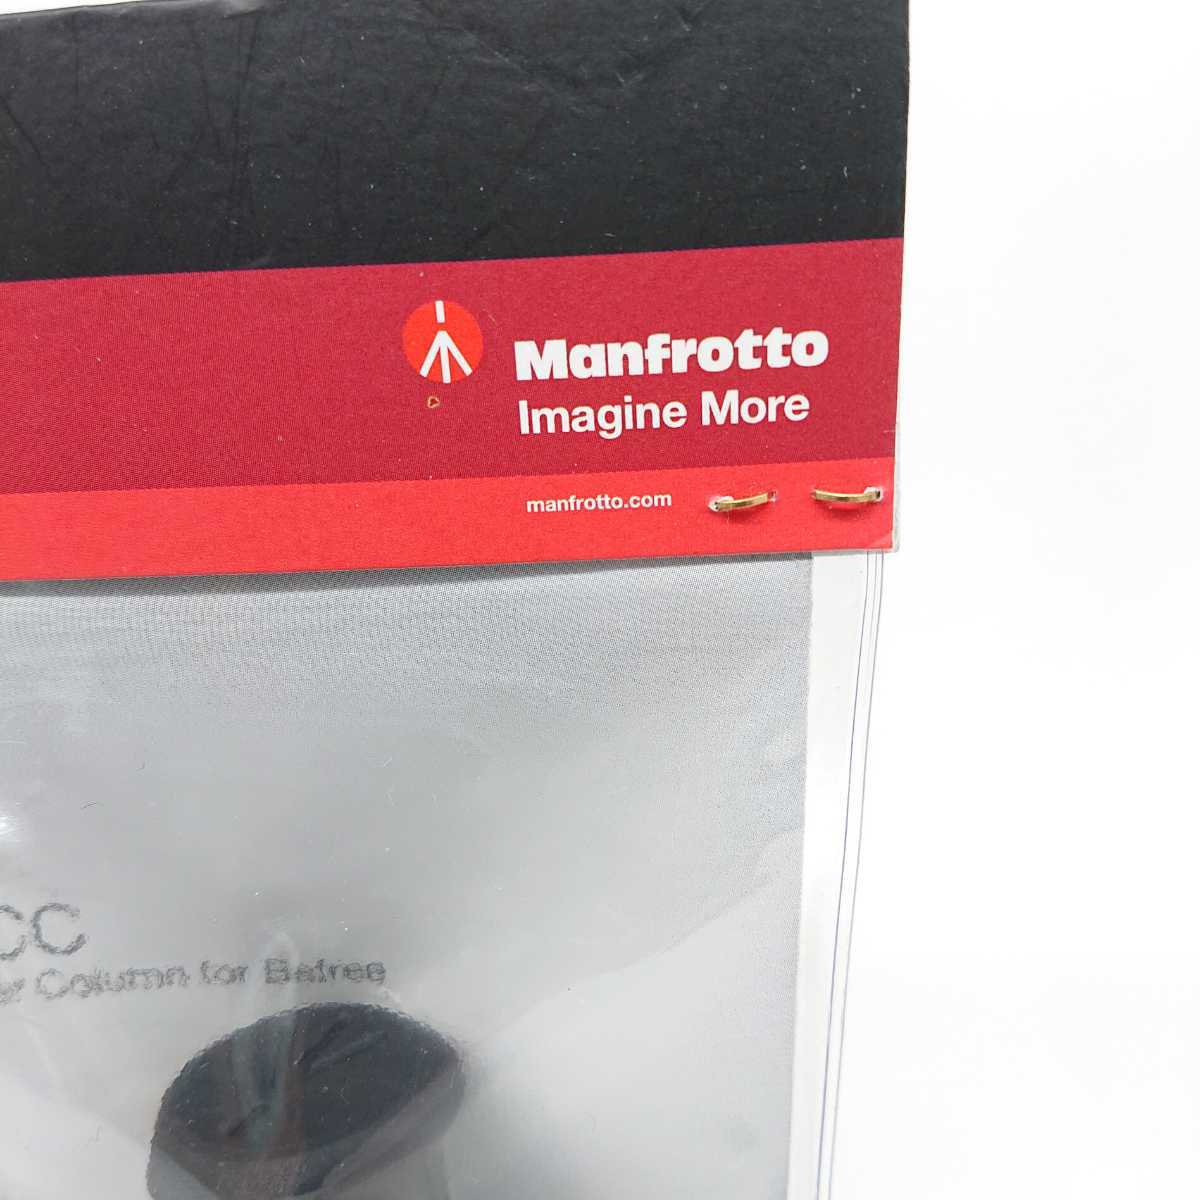 Manfrotto BFRSCC CENTER COLUMN SHORT FOR BEFREE Made in Italy befree用 マンフロット ショートセンターポール ☆ 未使用品 送料無料 ☆_画像4